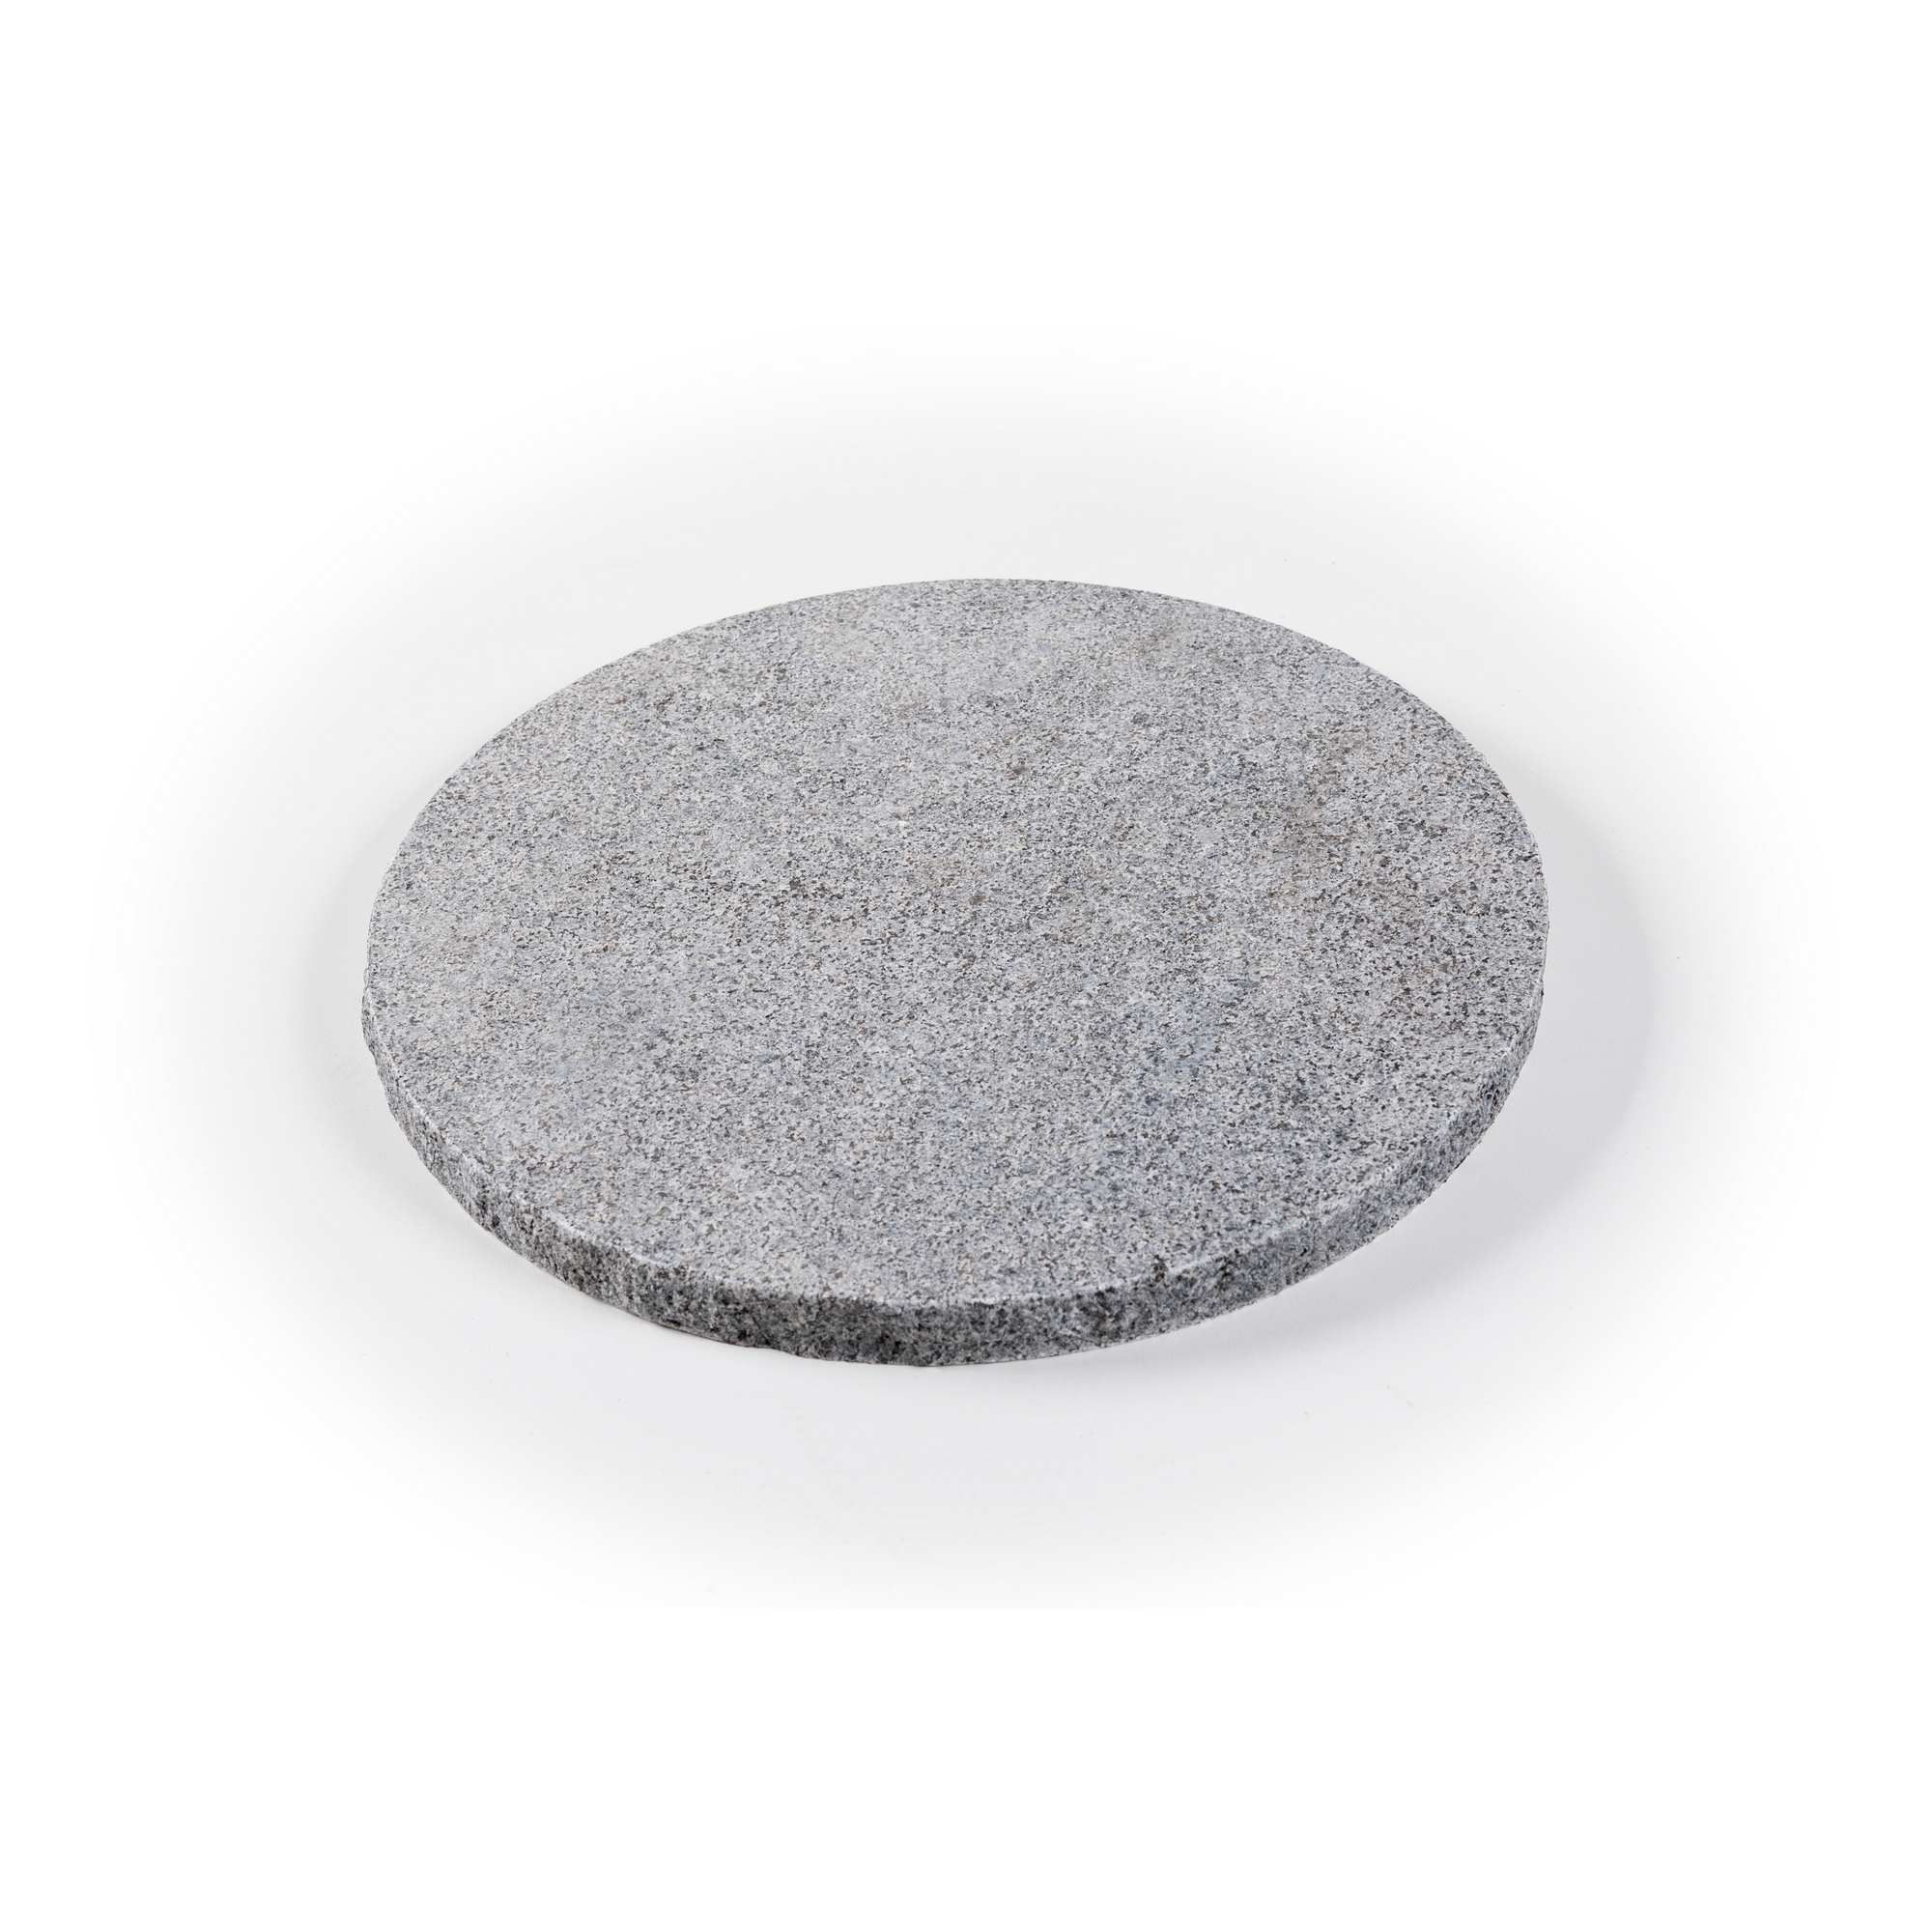 Granit-Trittstein Ø 25 x 3 cm + product picture